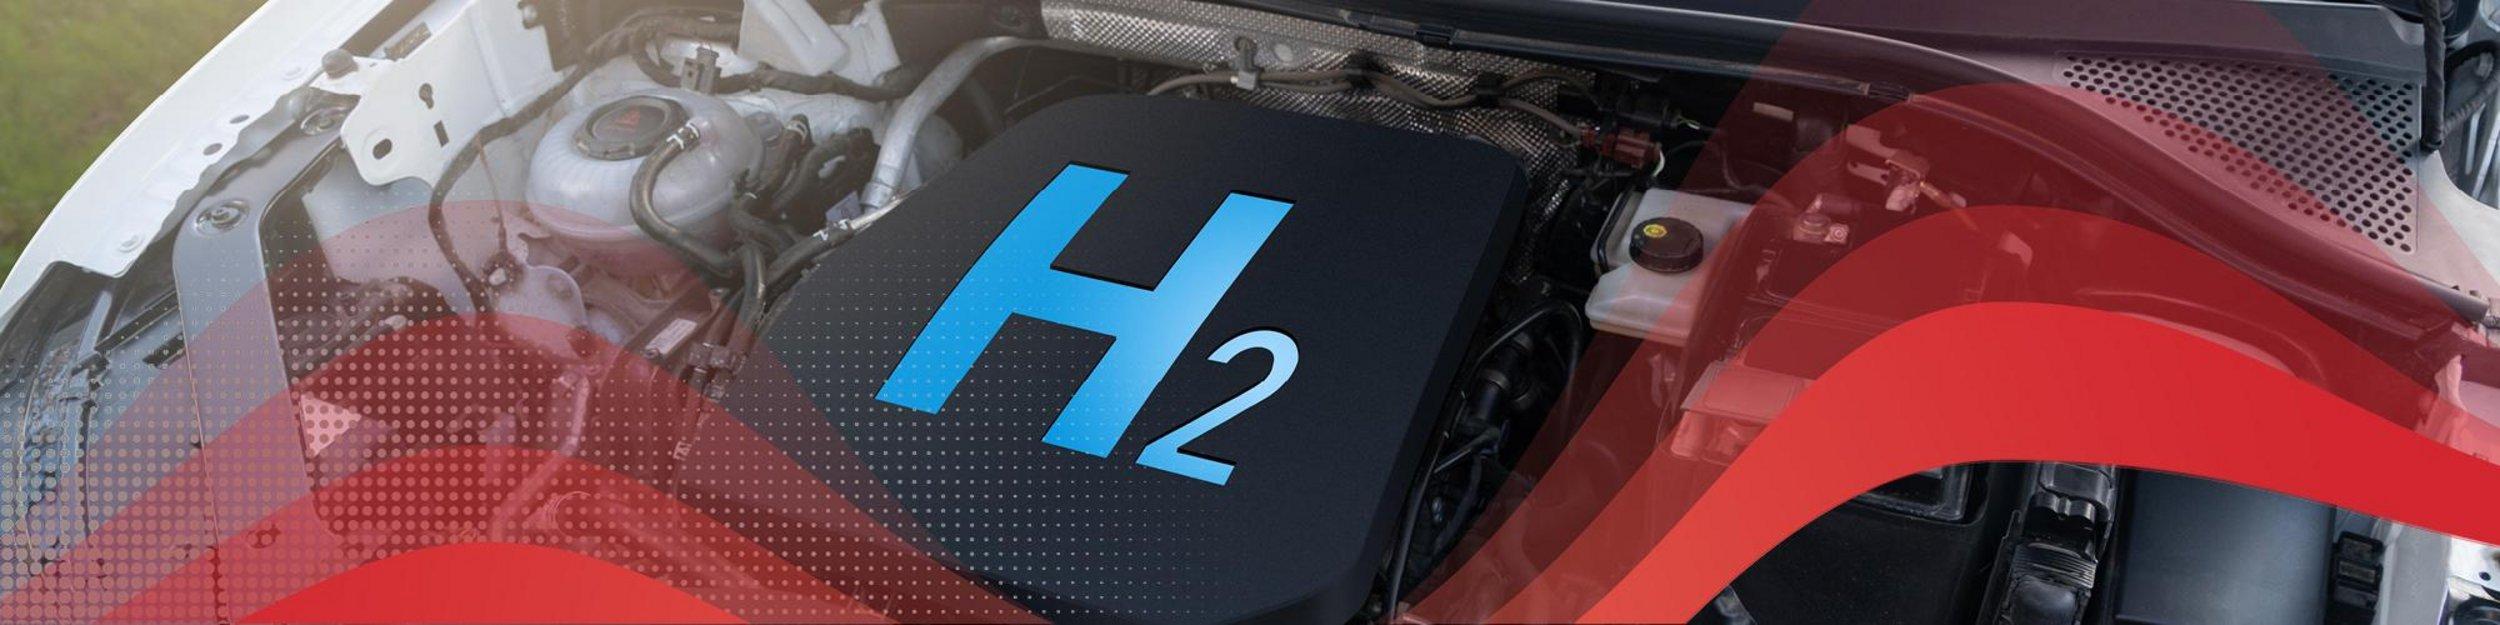 Hydrogen ICE vehicles are next generation of alternative fuel mobility